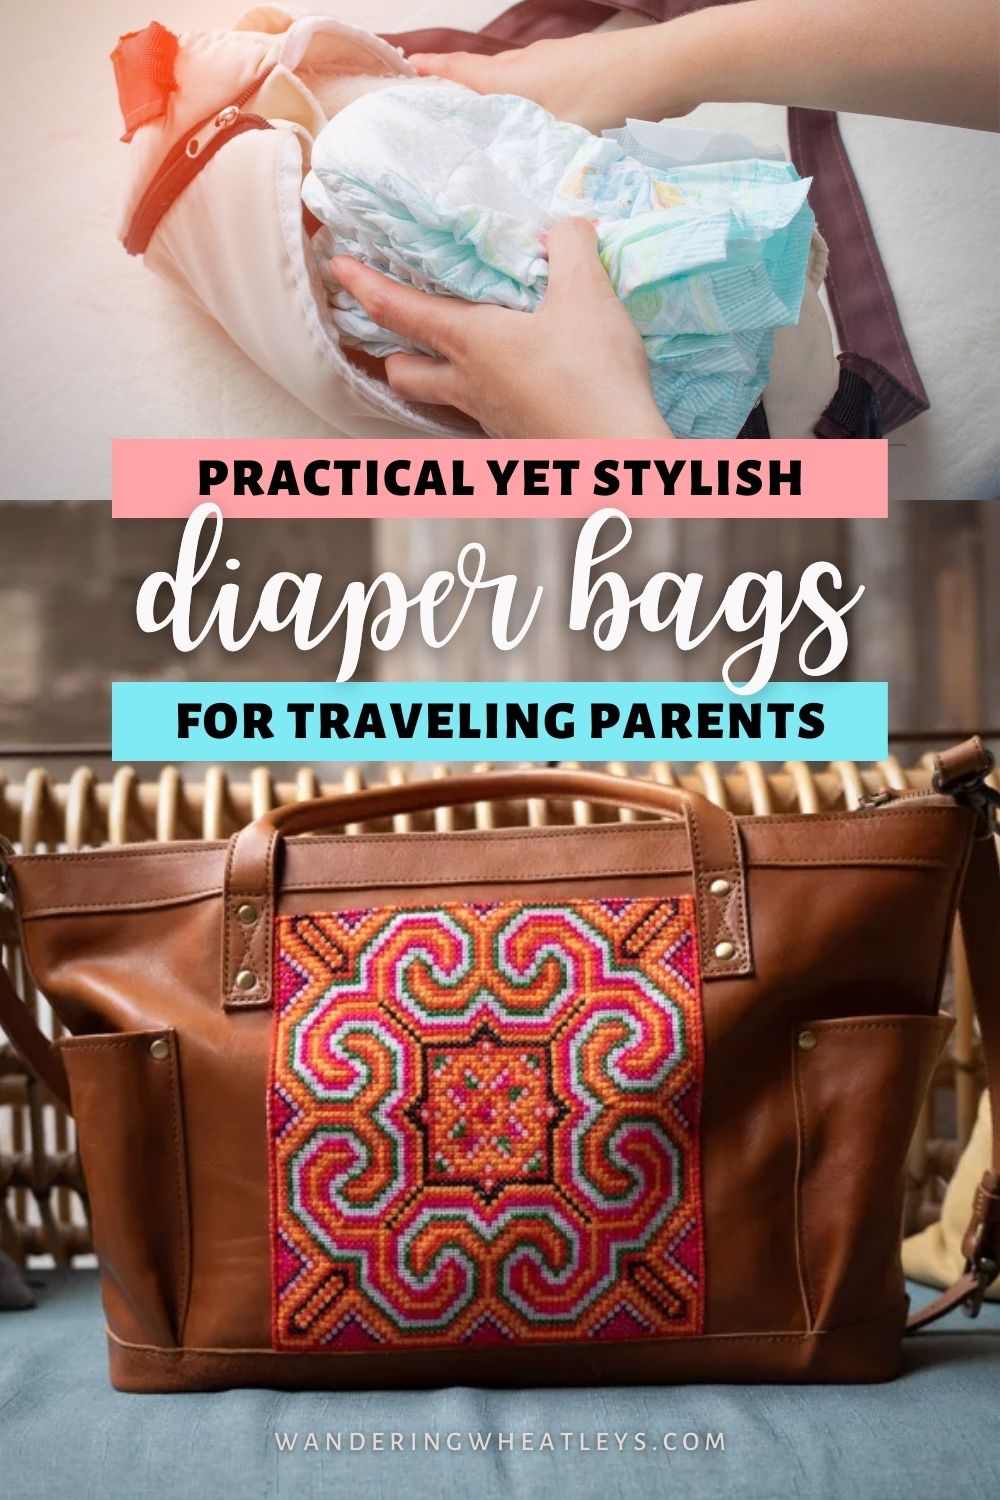 motherly Baby Diaper Bag, Mothers Maternity Bags for Travel Diaper Backpack  - Buy Baby Care Products in India | Flipkart.com